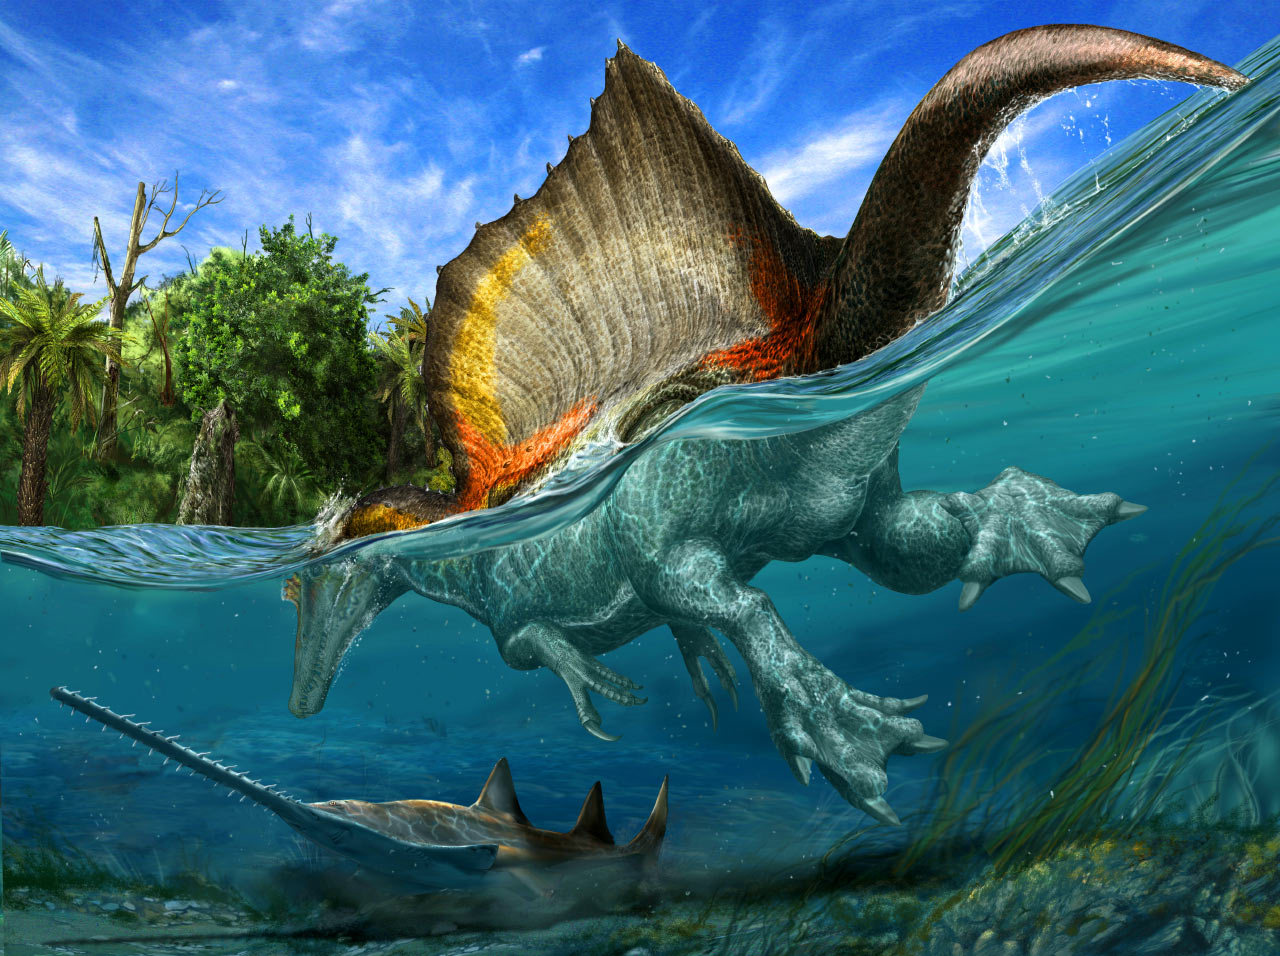 The only known dinosaur adapted to life in water, Spinosaurus